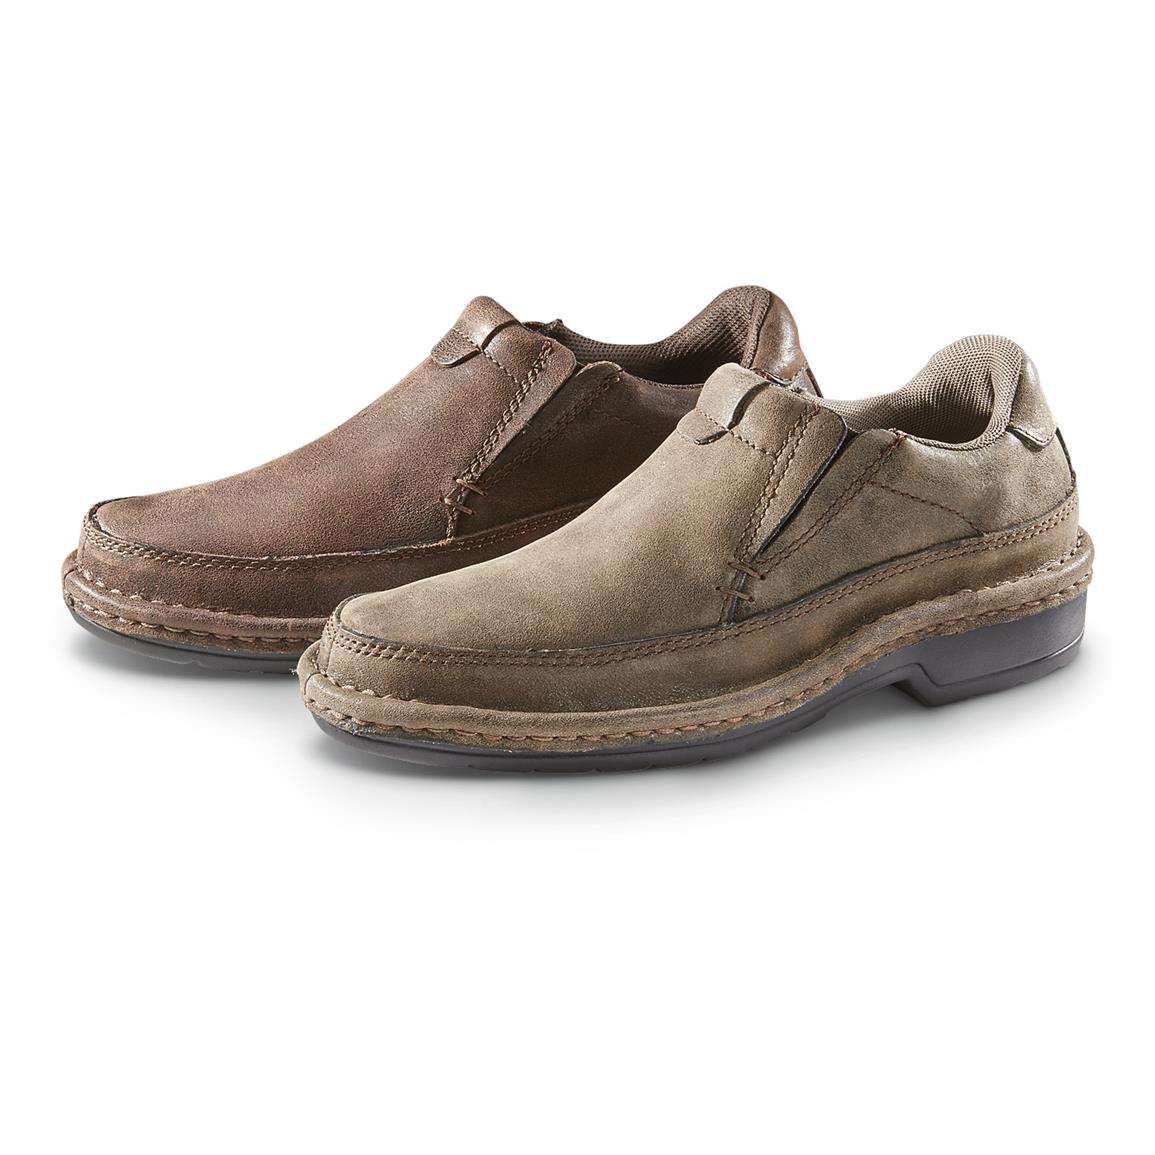 Roper Men's Opanka Casual Shoes - 648768, Casual Shoes at Sportsman's Guide